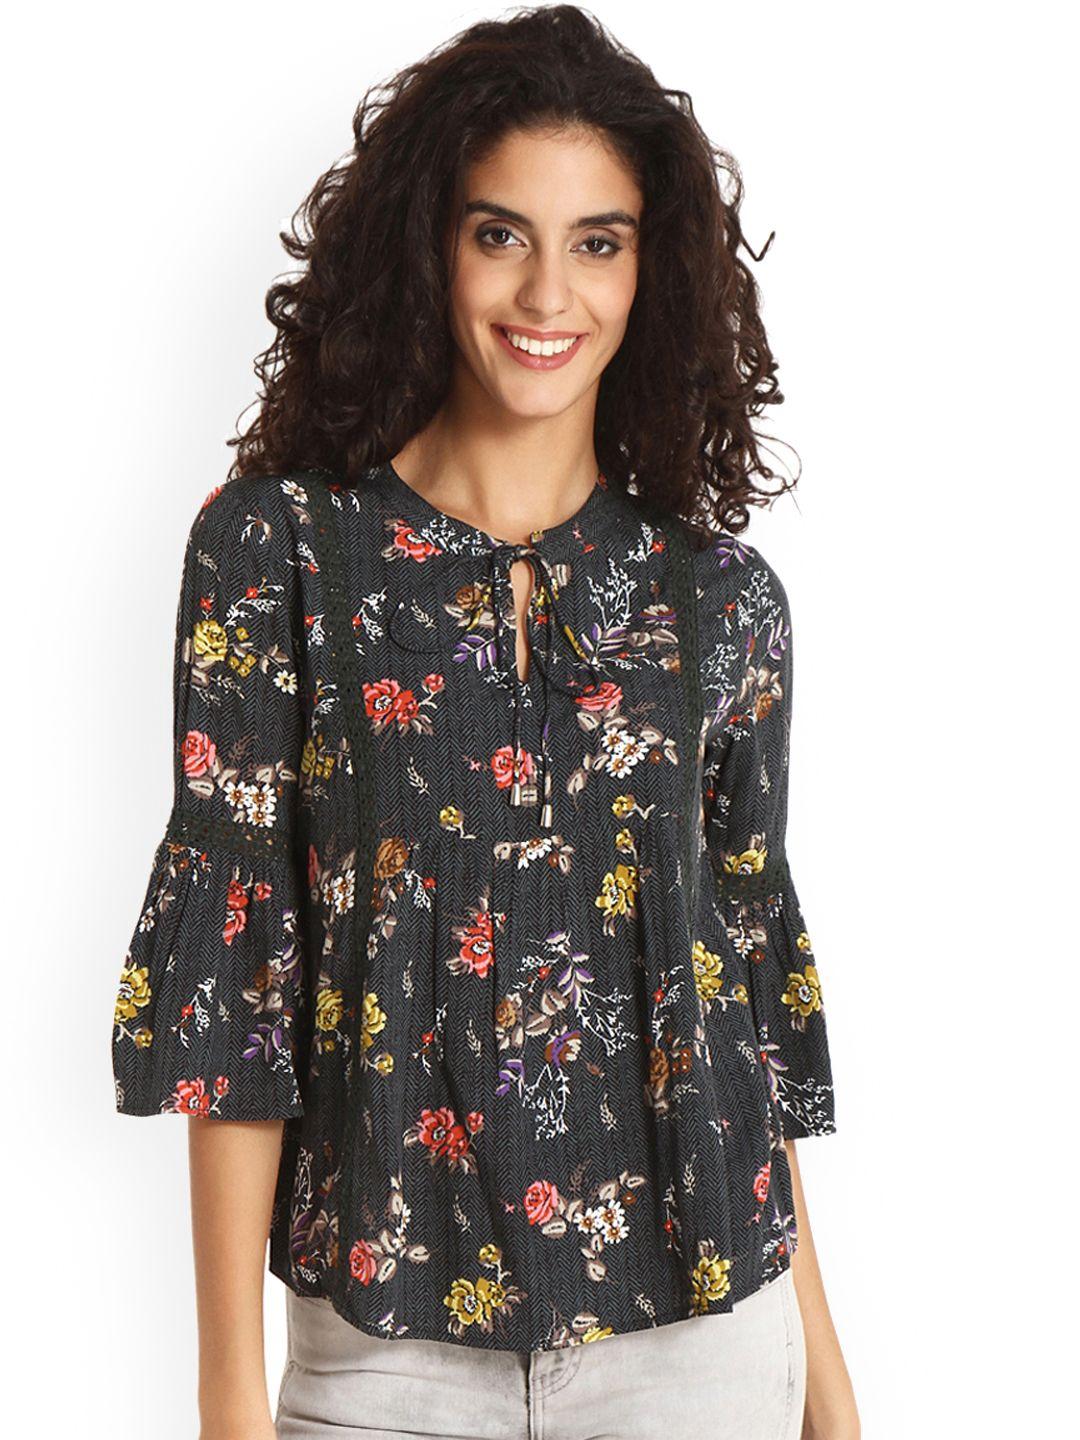 gipsy women charcoal grey floral print top